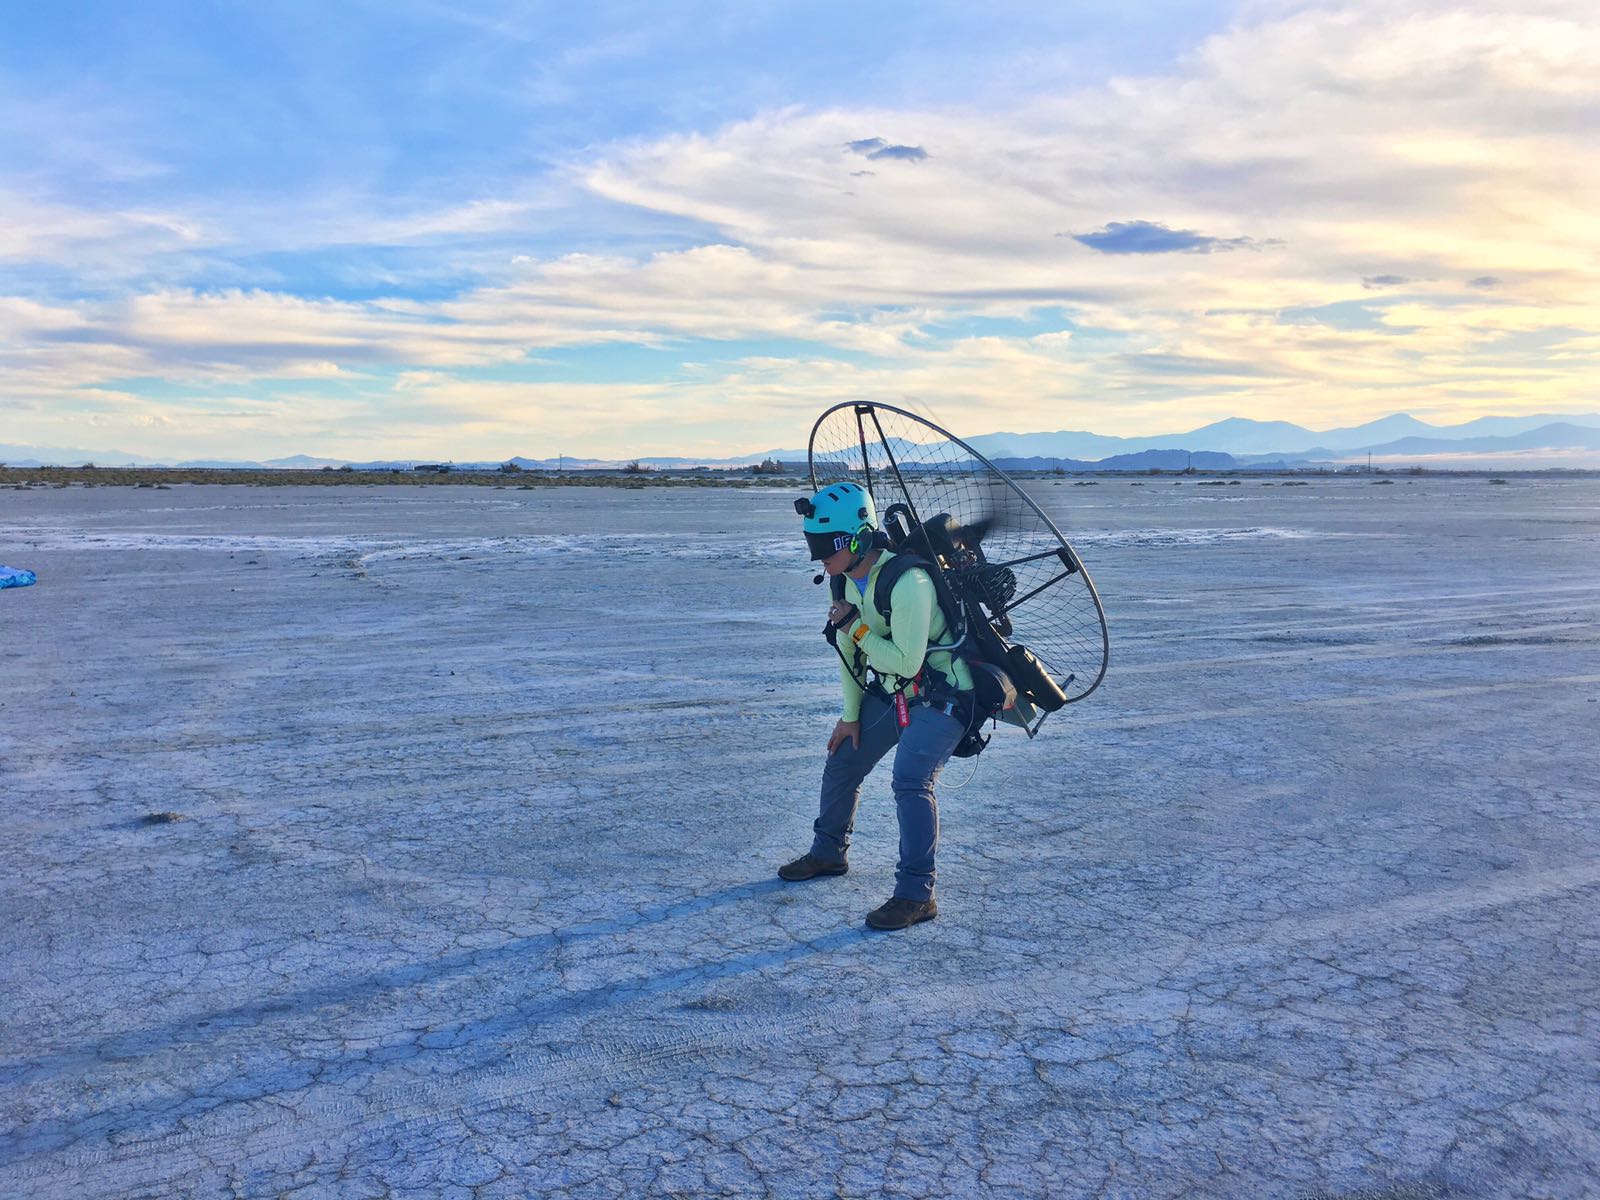 Prepping to fly the salt flats